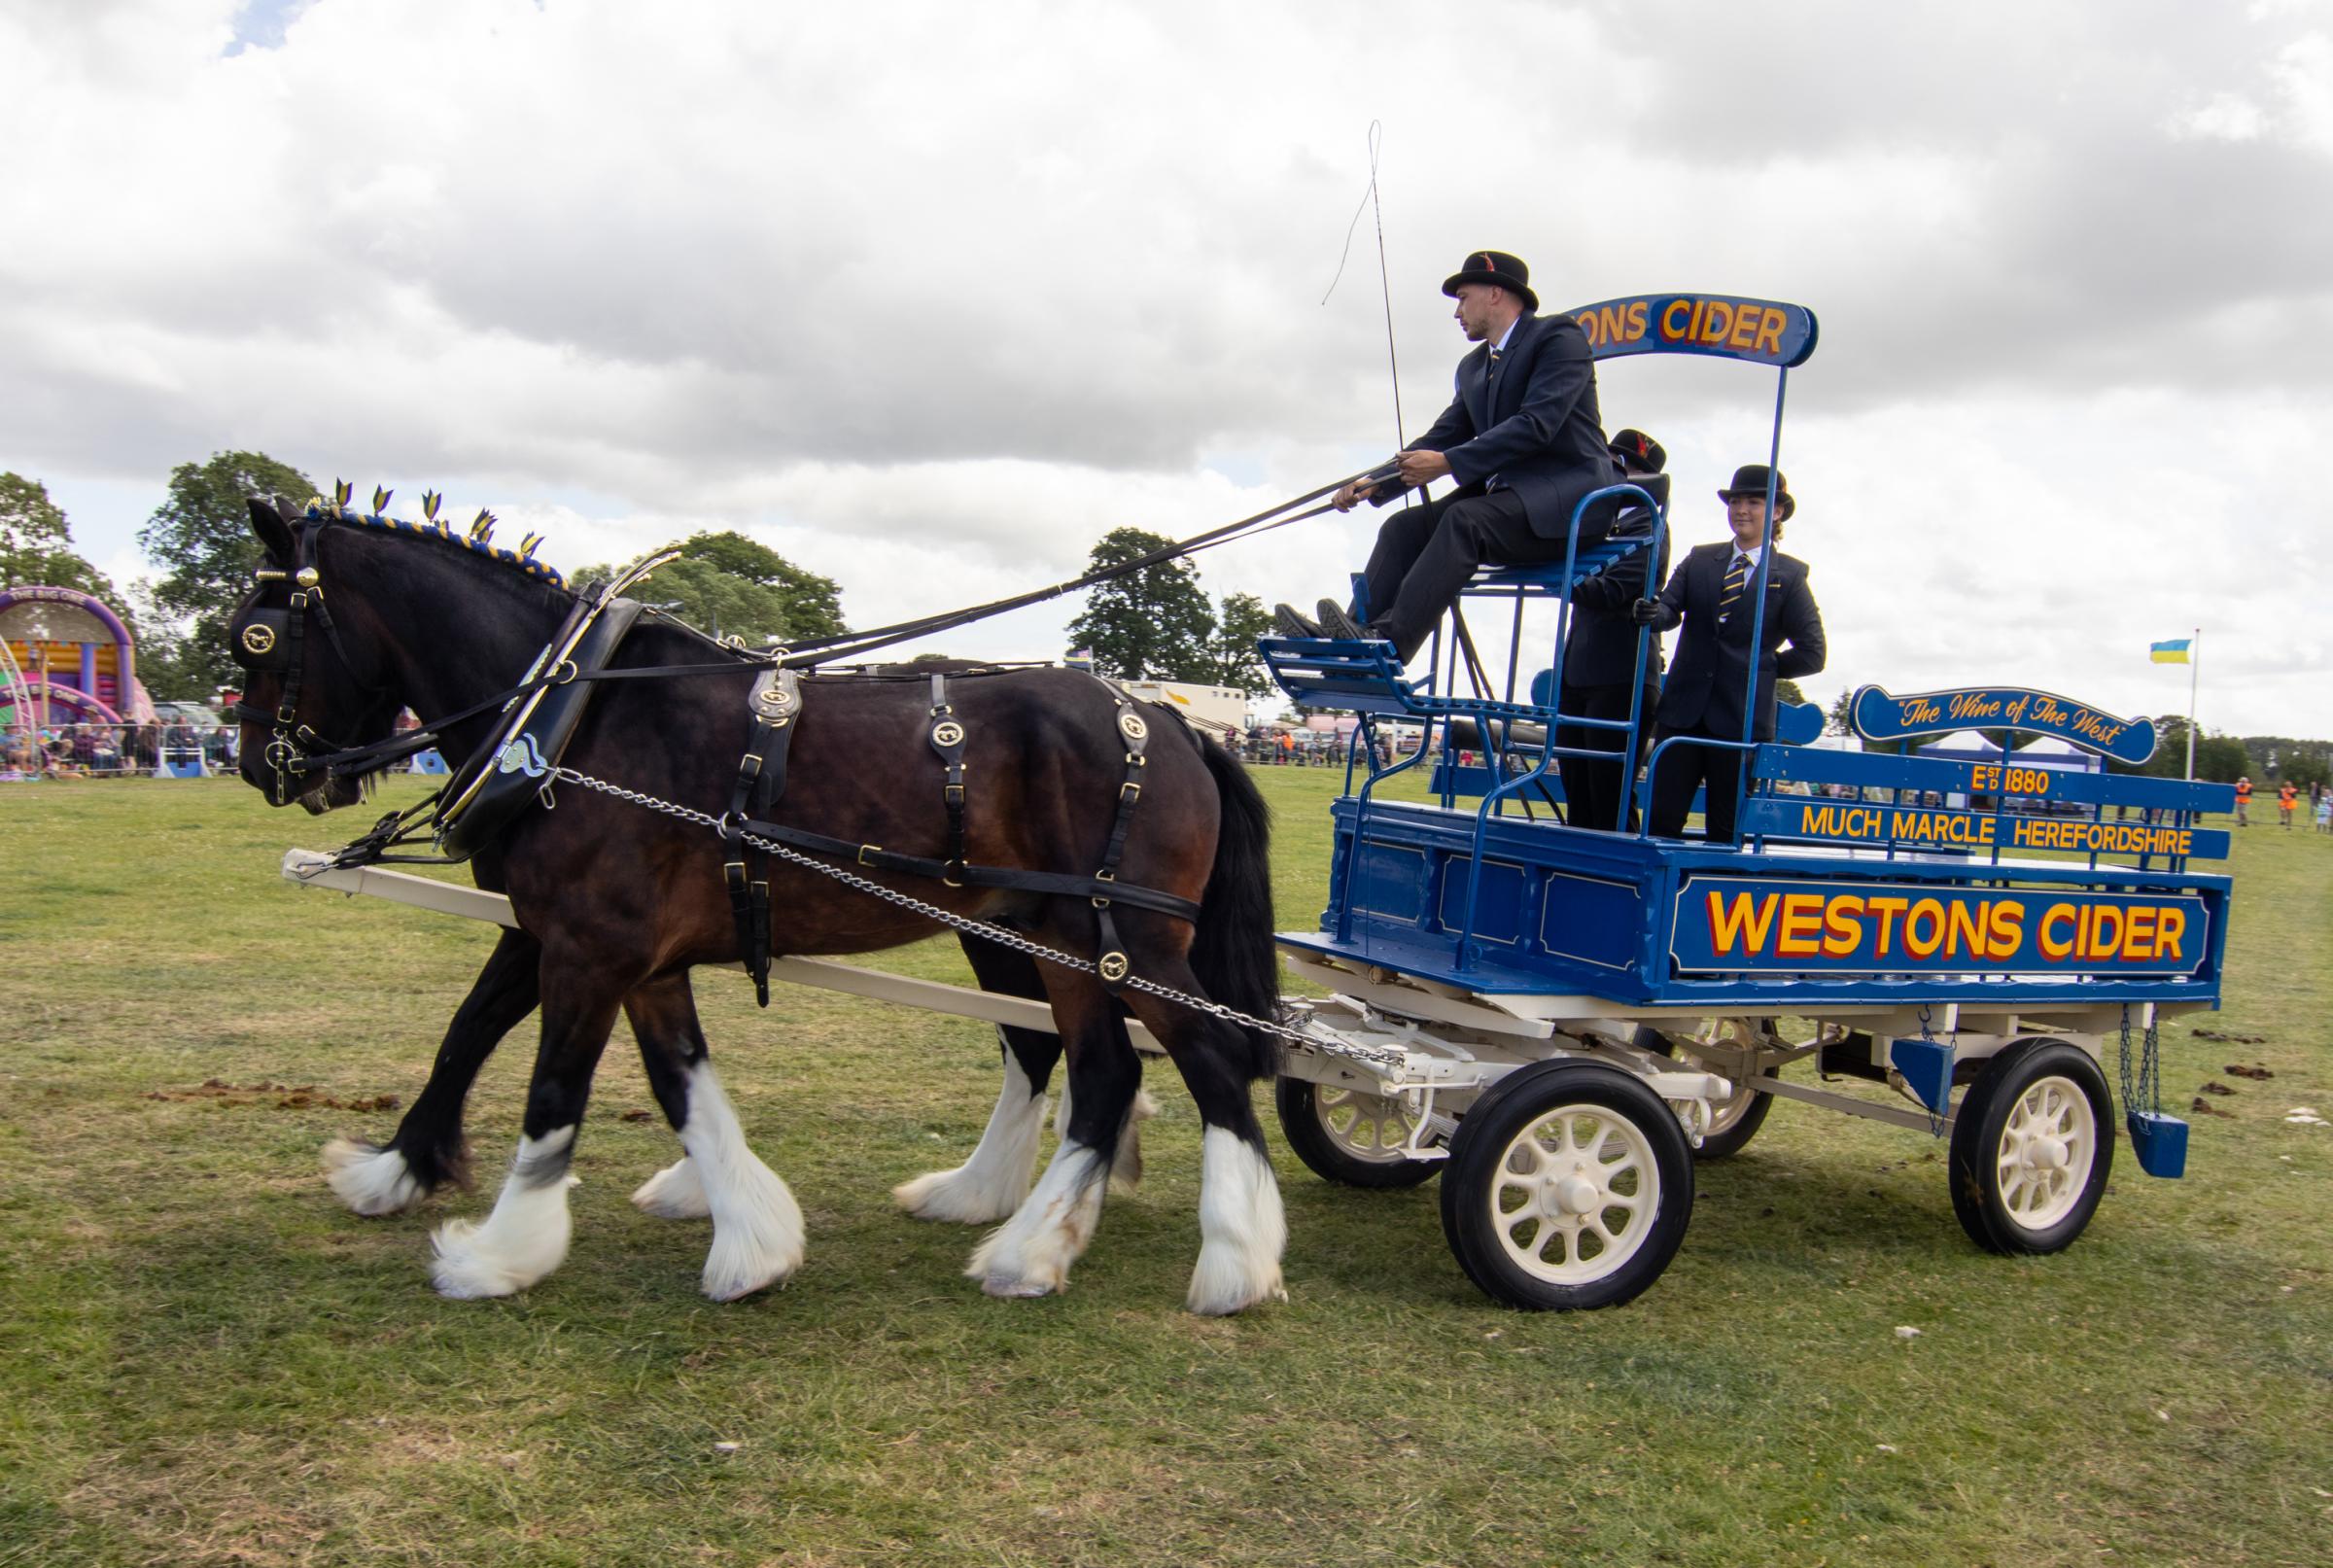 Weston’s Cider from Much Marcle, near Ledbury, also took part. Picture: Sofie Smith